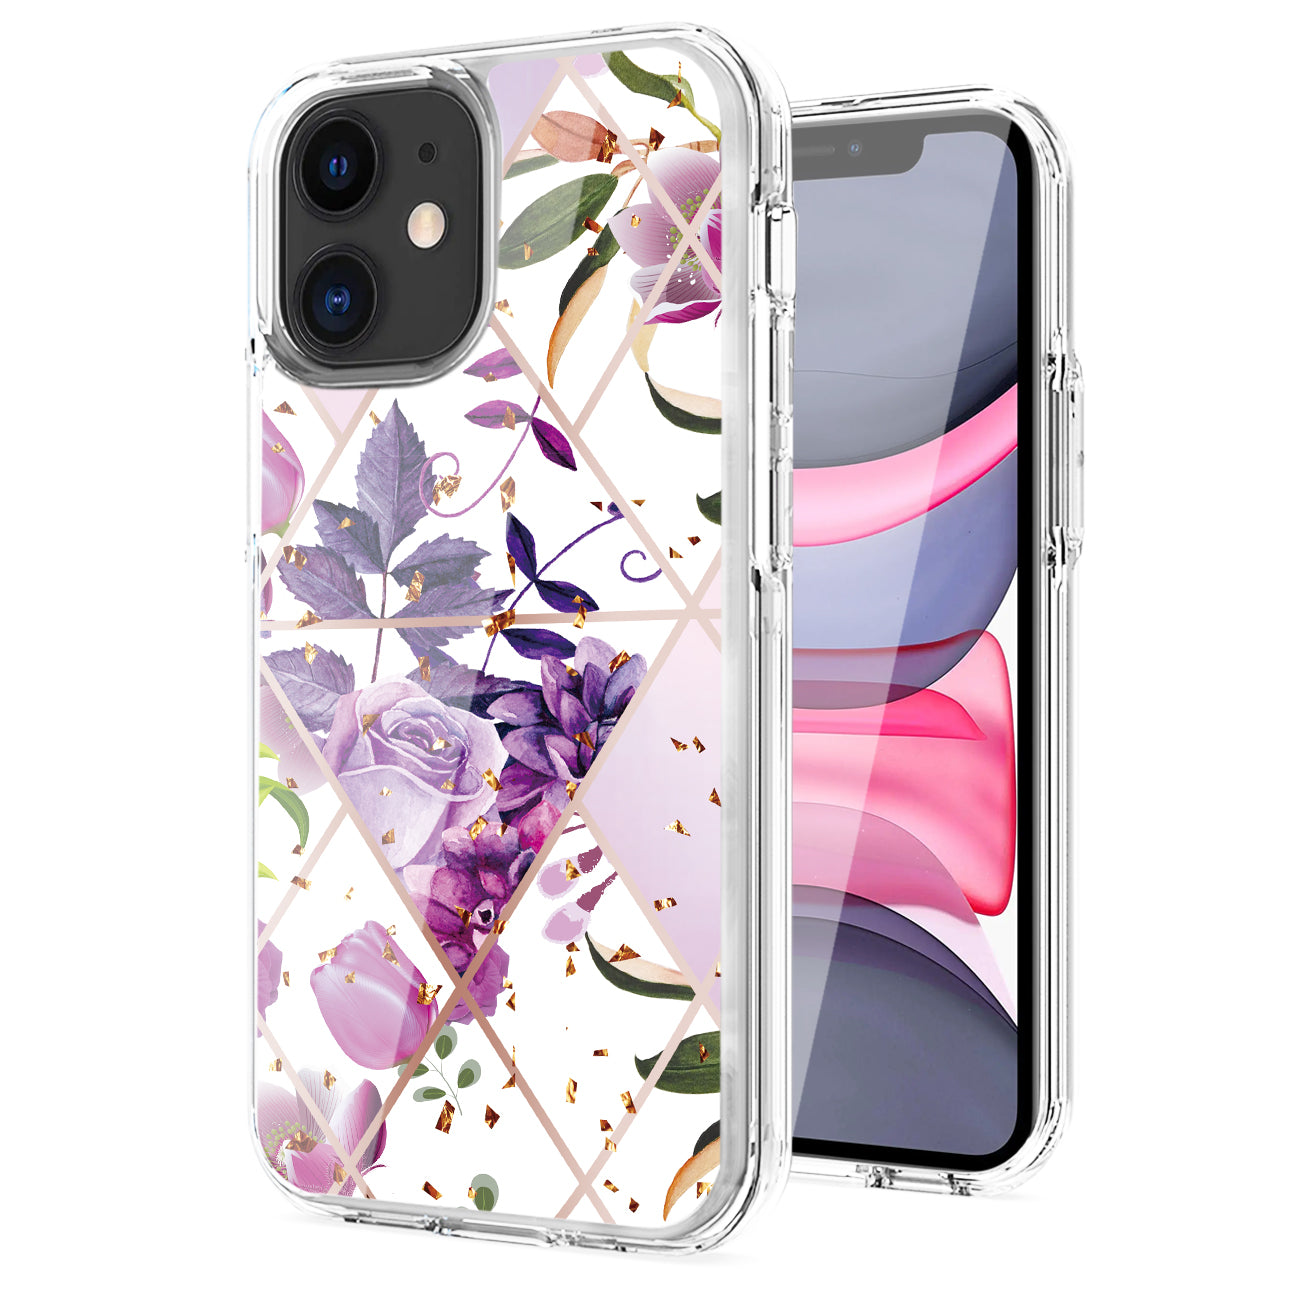 Flower Design Dual Layer Hybrid Hard & Soft TPU Rubber Case for IPH 11 In Purple Base Flower